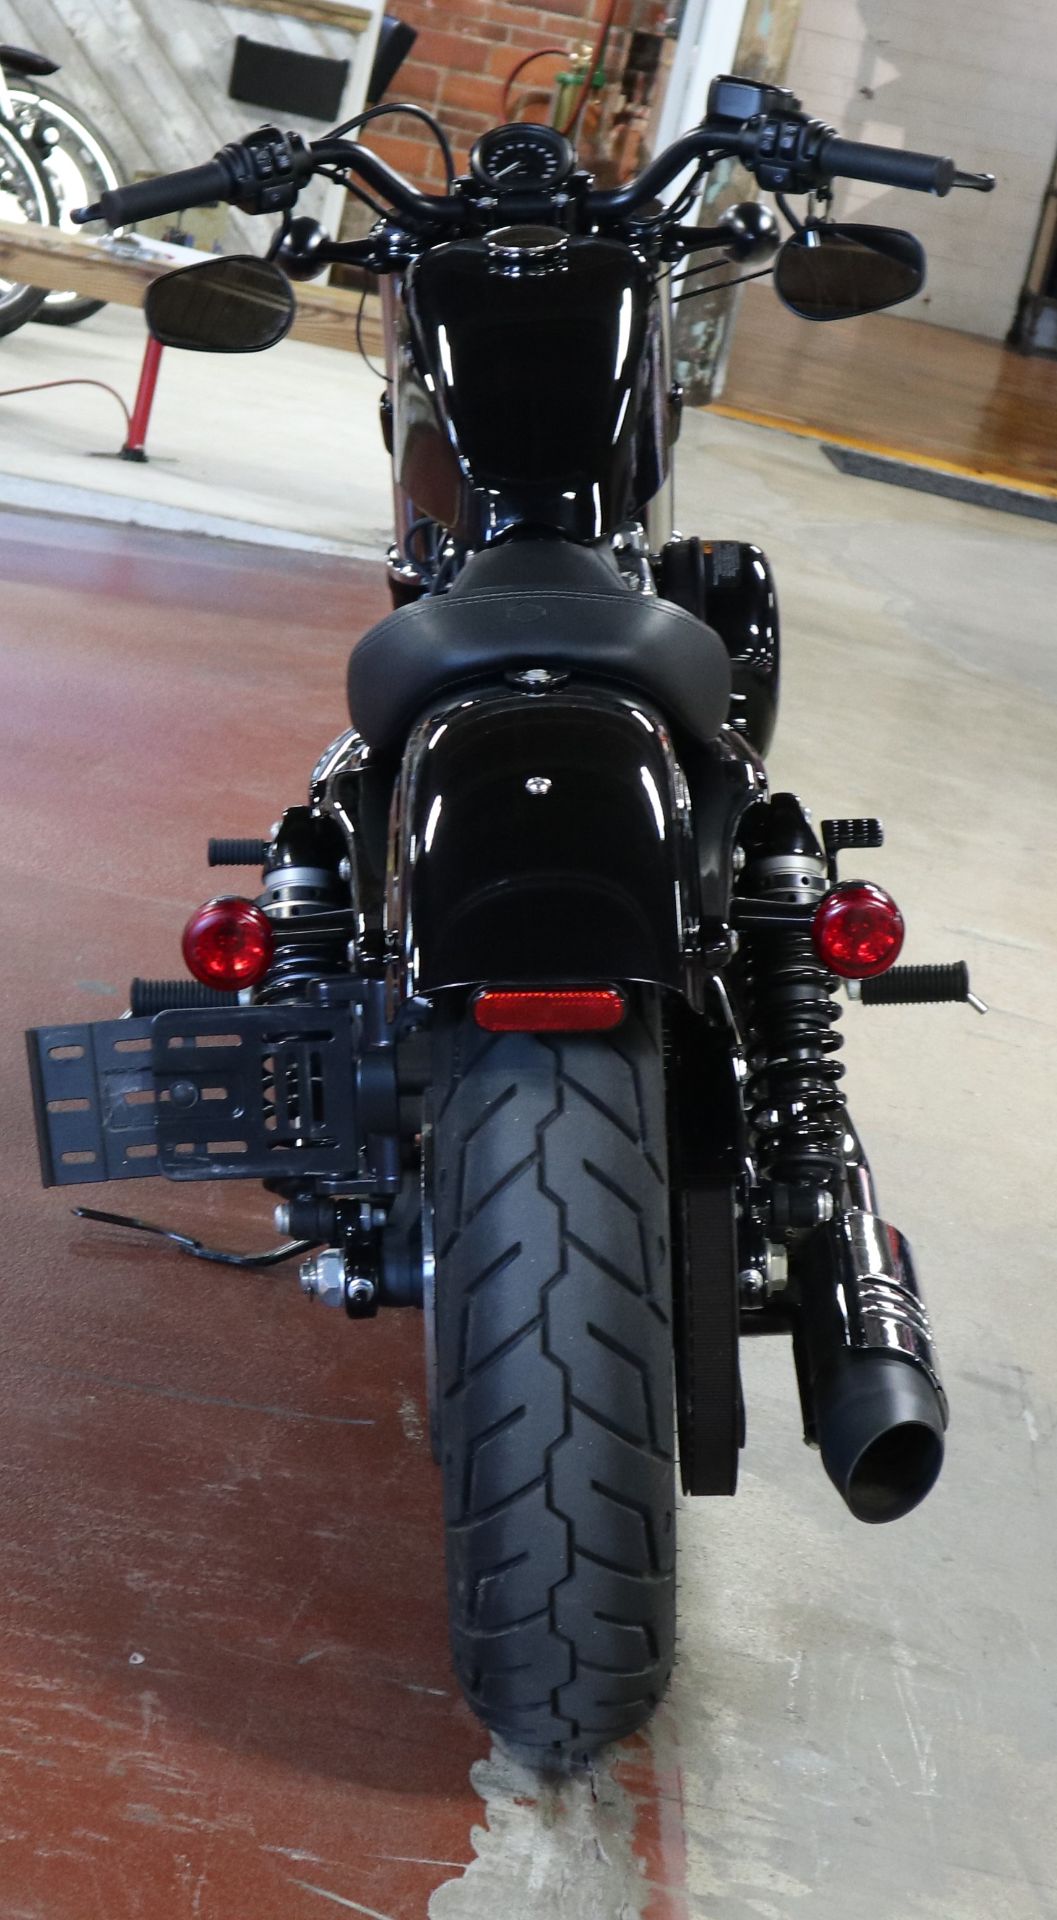 2021 Harley-Davidson Forty-Eight® in New London, Connecticut - Photo 7